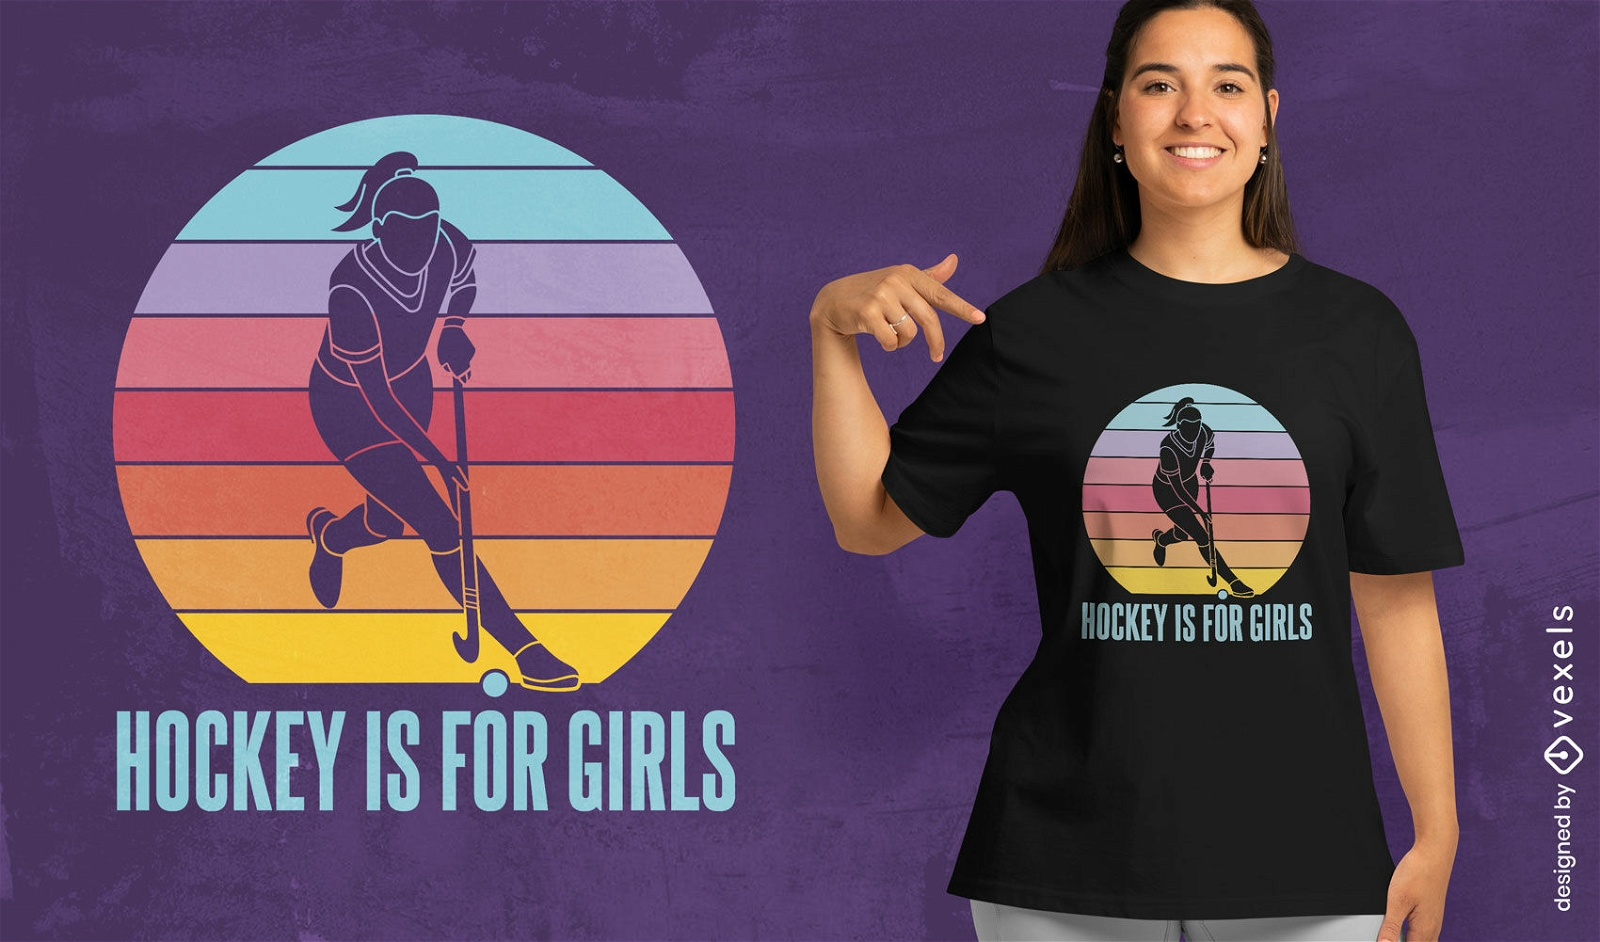 Hockey vector t-shirt design for commercial use - Buy t-shirt designs